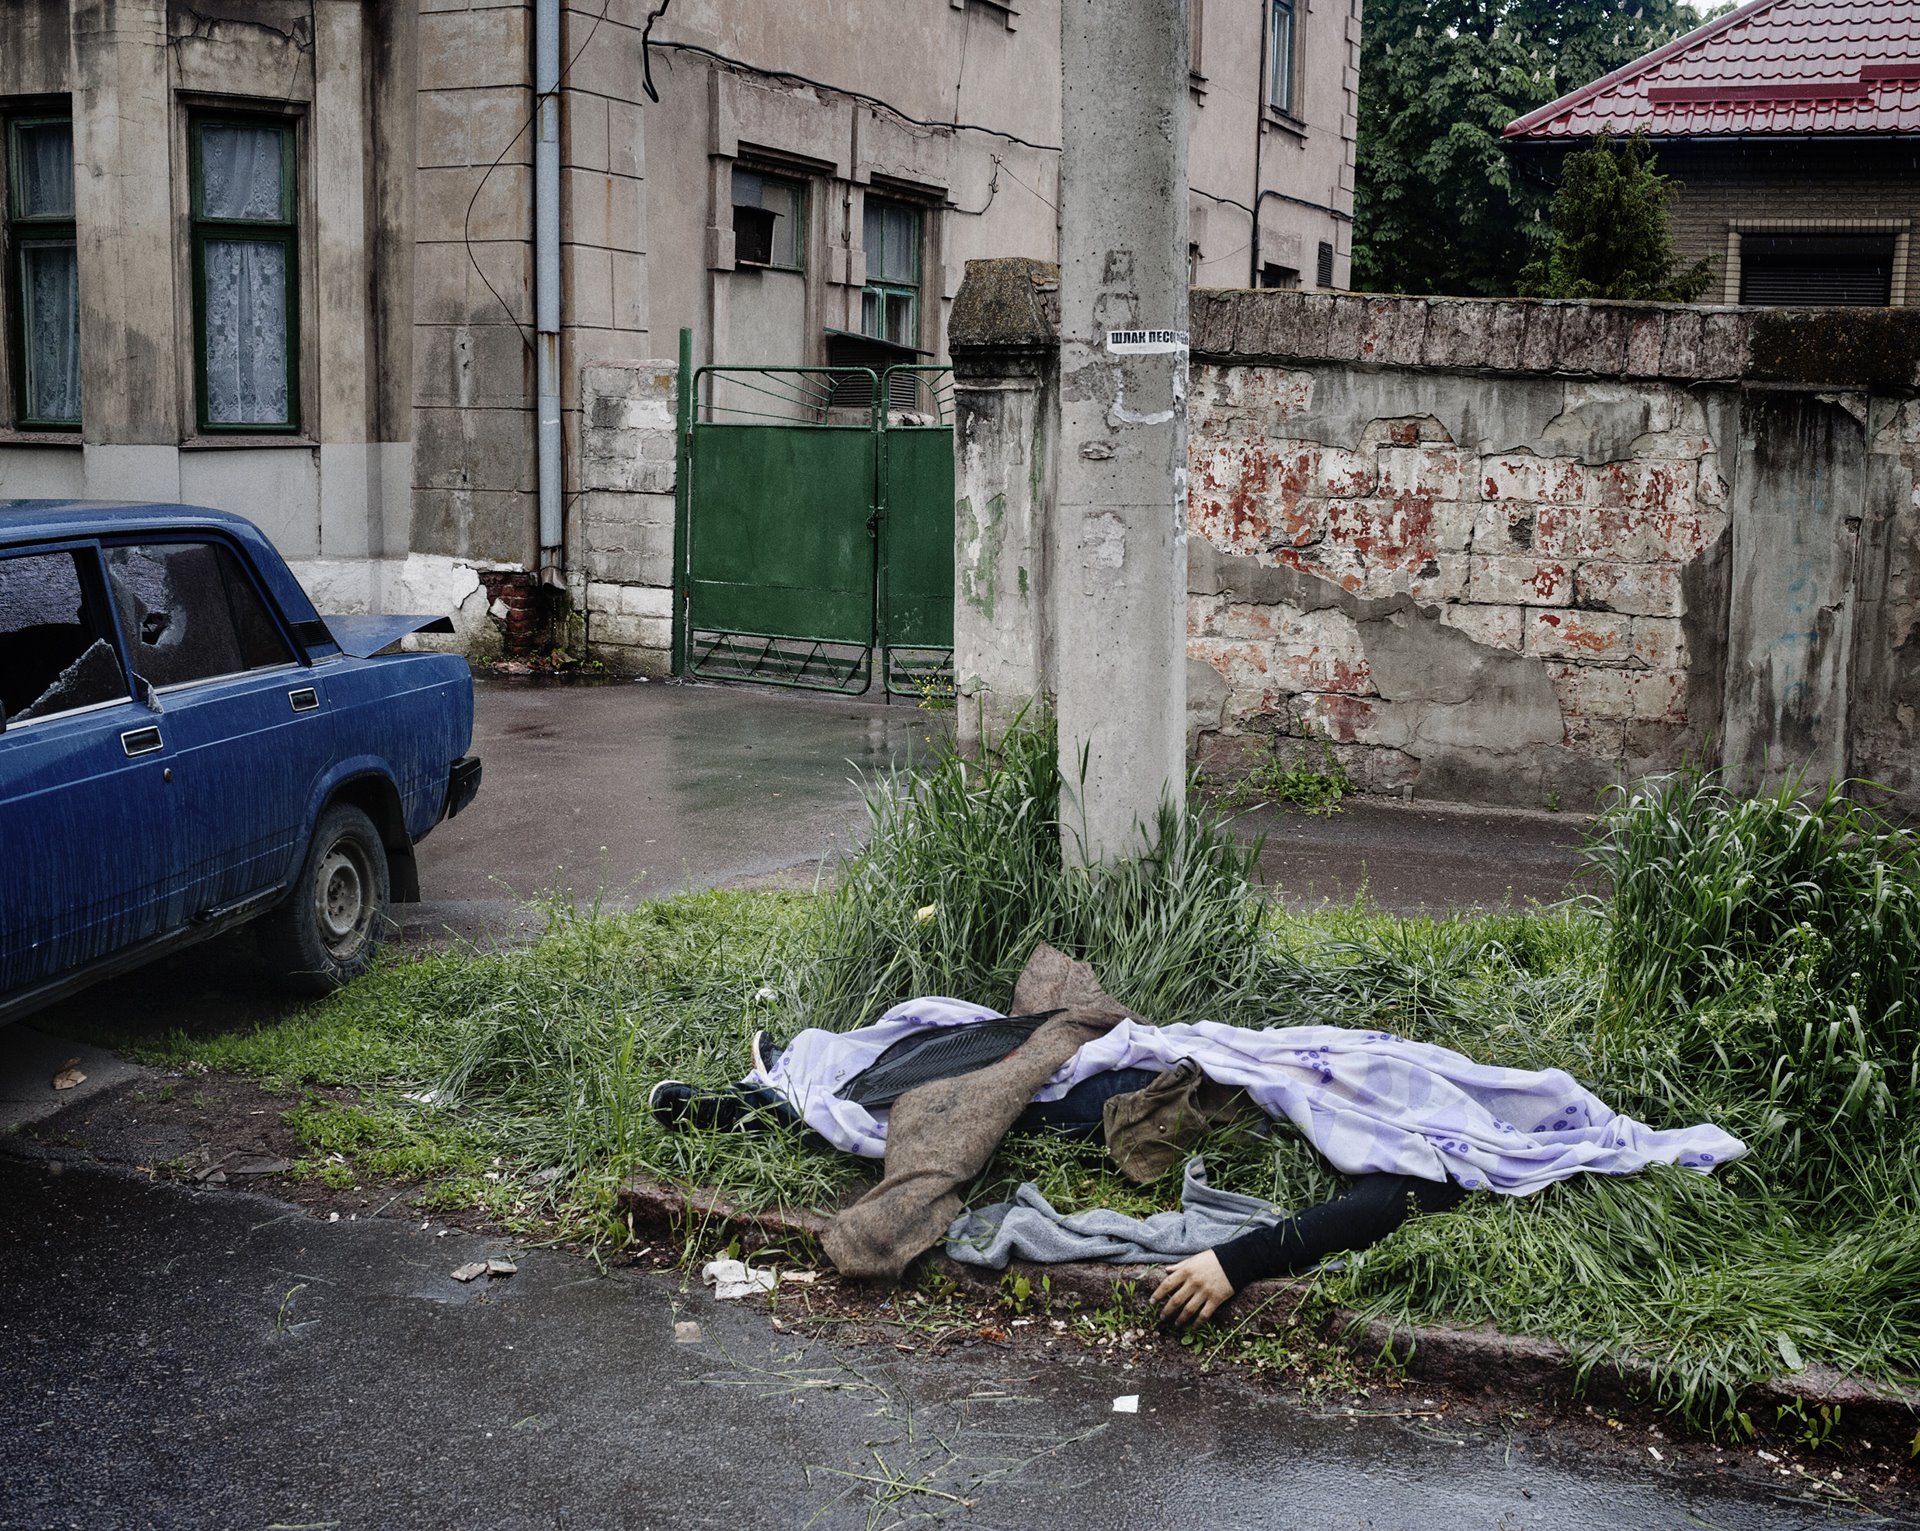 The body of a man lies in front of a police station, in Mariupol, Ukraine, following a fight between separatist militia and the Ukraine National Guard.